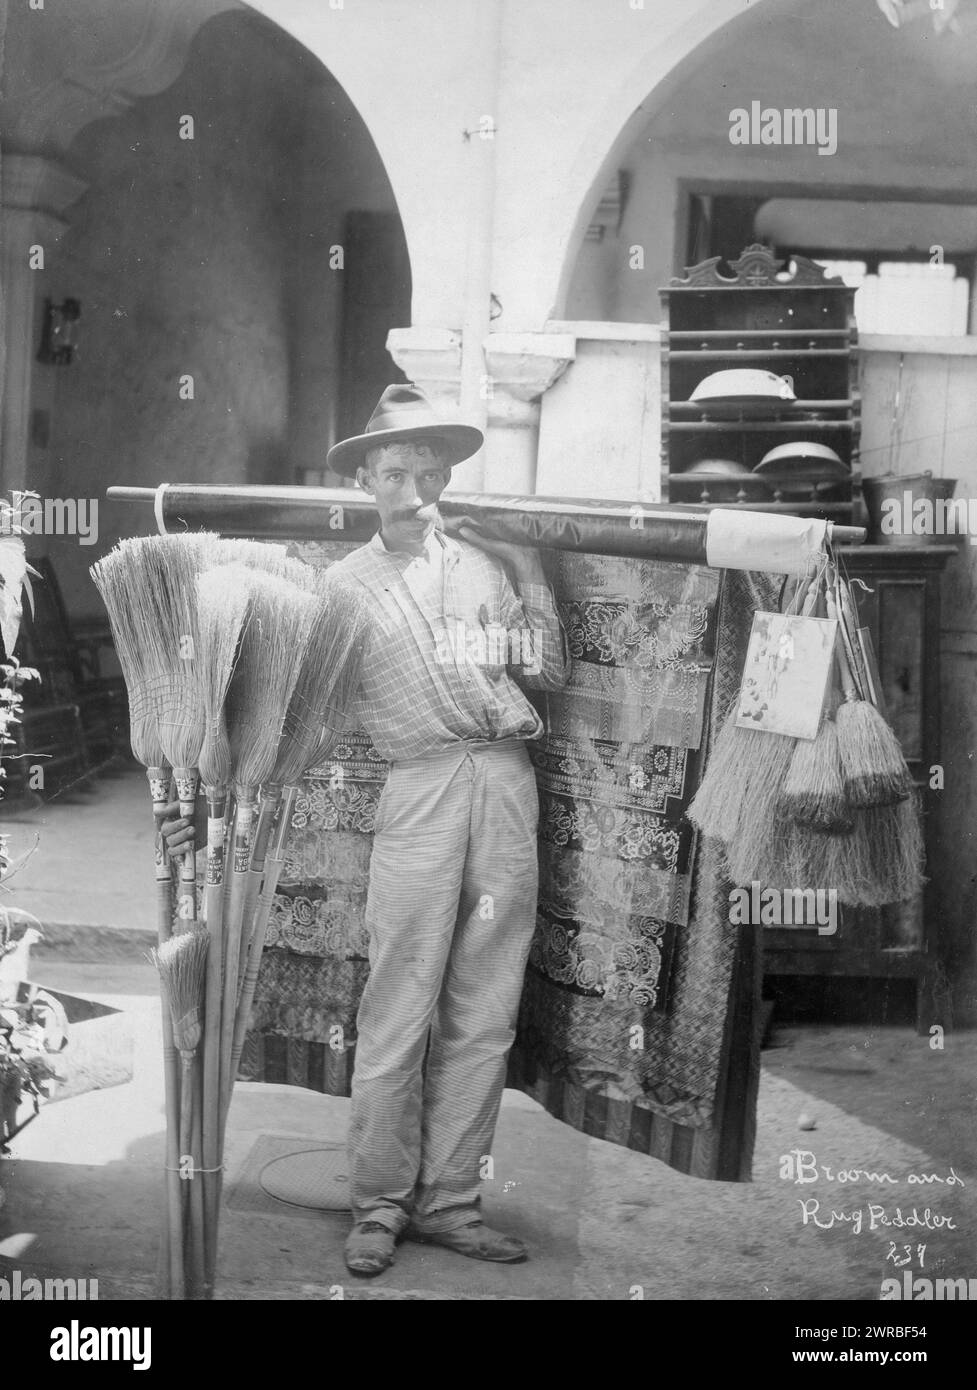 Broom and rug peddler, Cuba, Carpenter, Frank G. (Frank George), 1855-1924, collector, between 1895 and 1923, Peddlers, Cuba, 1890-1930, Photographic prints, 1890-1930., Portrait photographs, 1890-1930, Photographic prints, 1890-1930, 1 photographic print Stock Photo